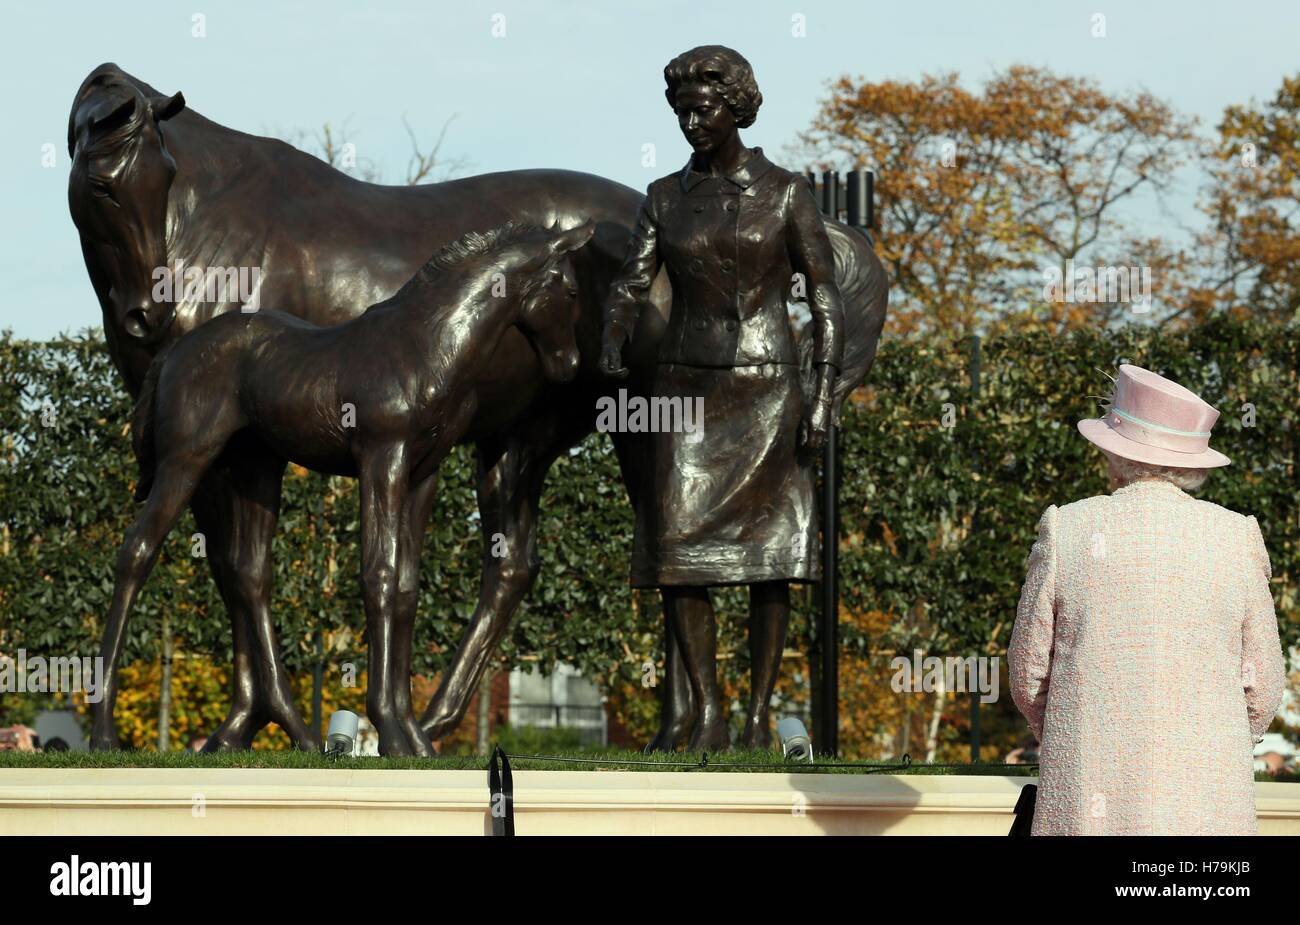 Queen Elizabeth II at Newmarket Racecourse, after she unveiled a statue of herself with a foal and a mare as a gift in the year of her 90th birthday, during a visit to the town often referred to as the headquarters of British racing. Stock Photo